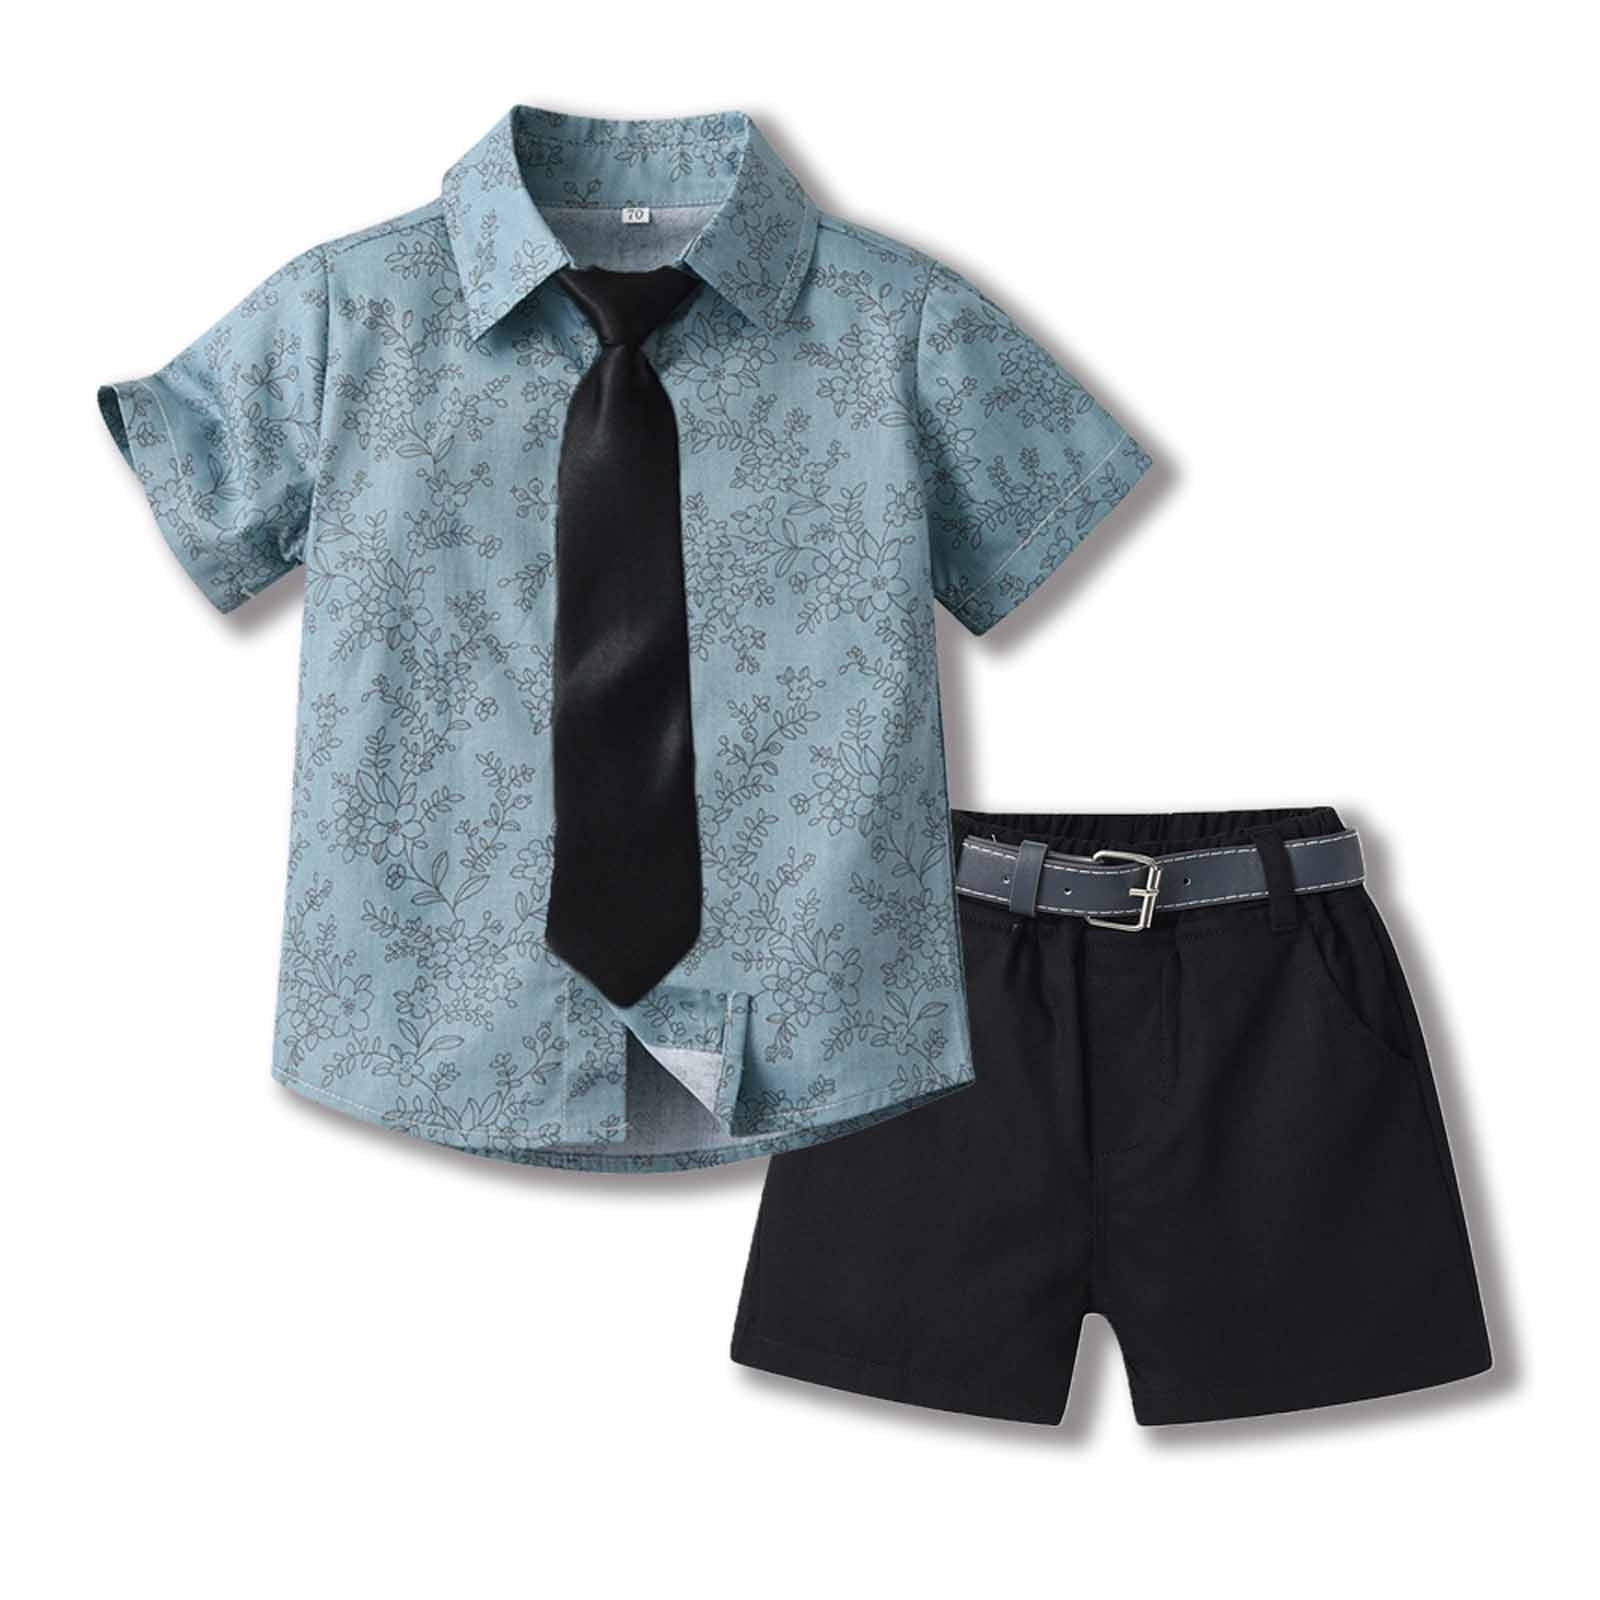 HAVEit360) UK Brand Baby Boys Classic Party Dress Set (Shirt + Short Pant +  Suspender + Bow Tie) For Age Range(0 Month - 5 Years)Baby Sizes / 6 Sizes